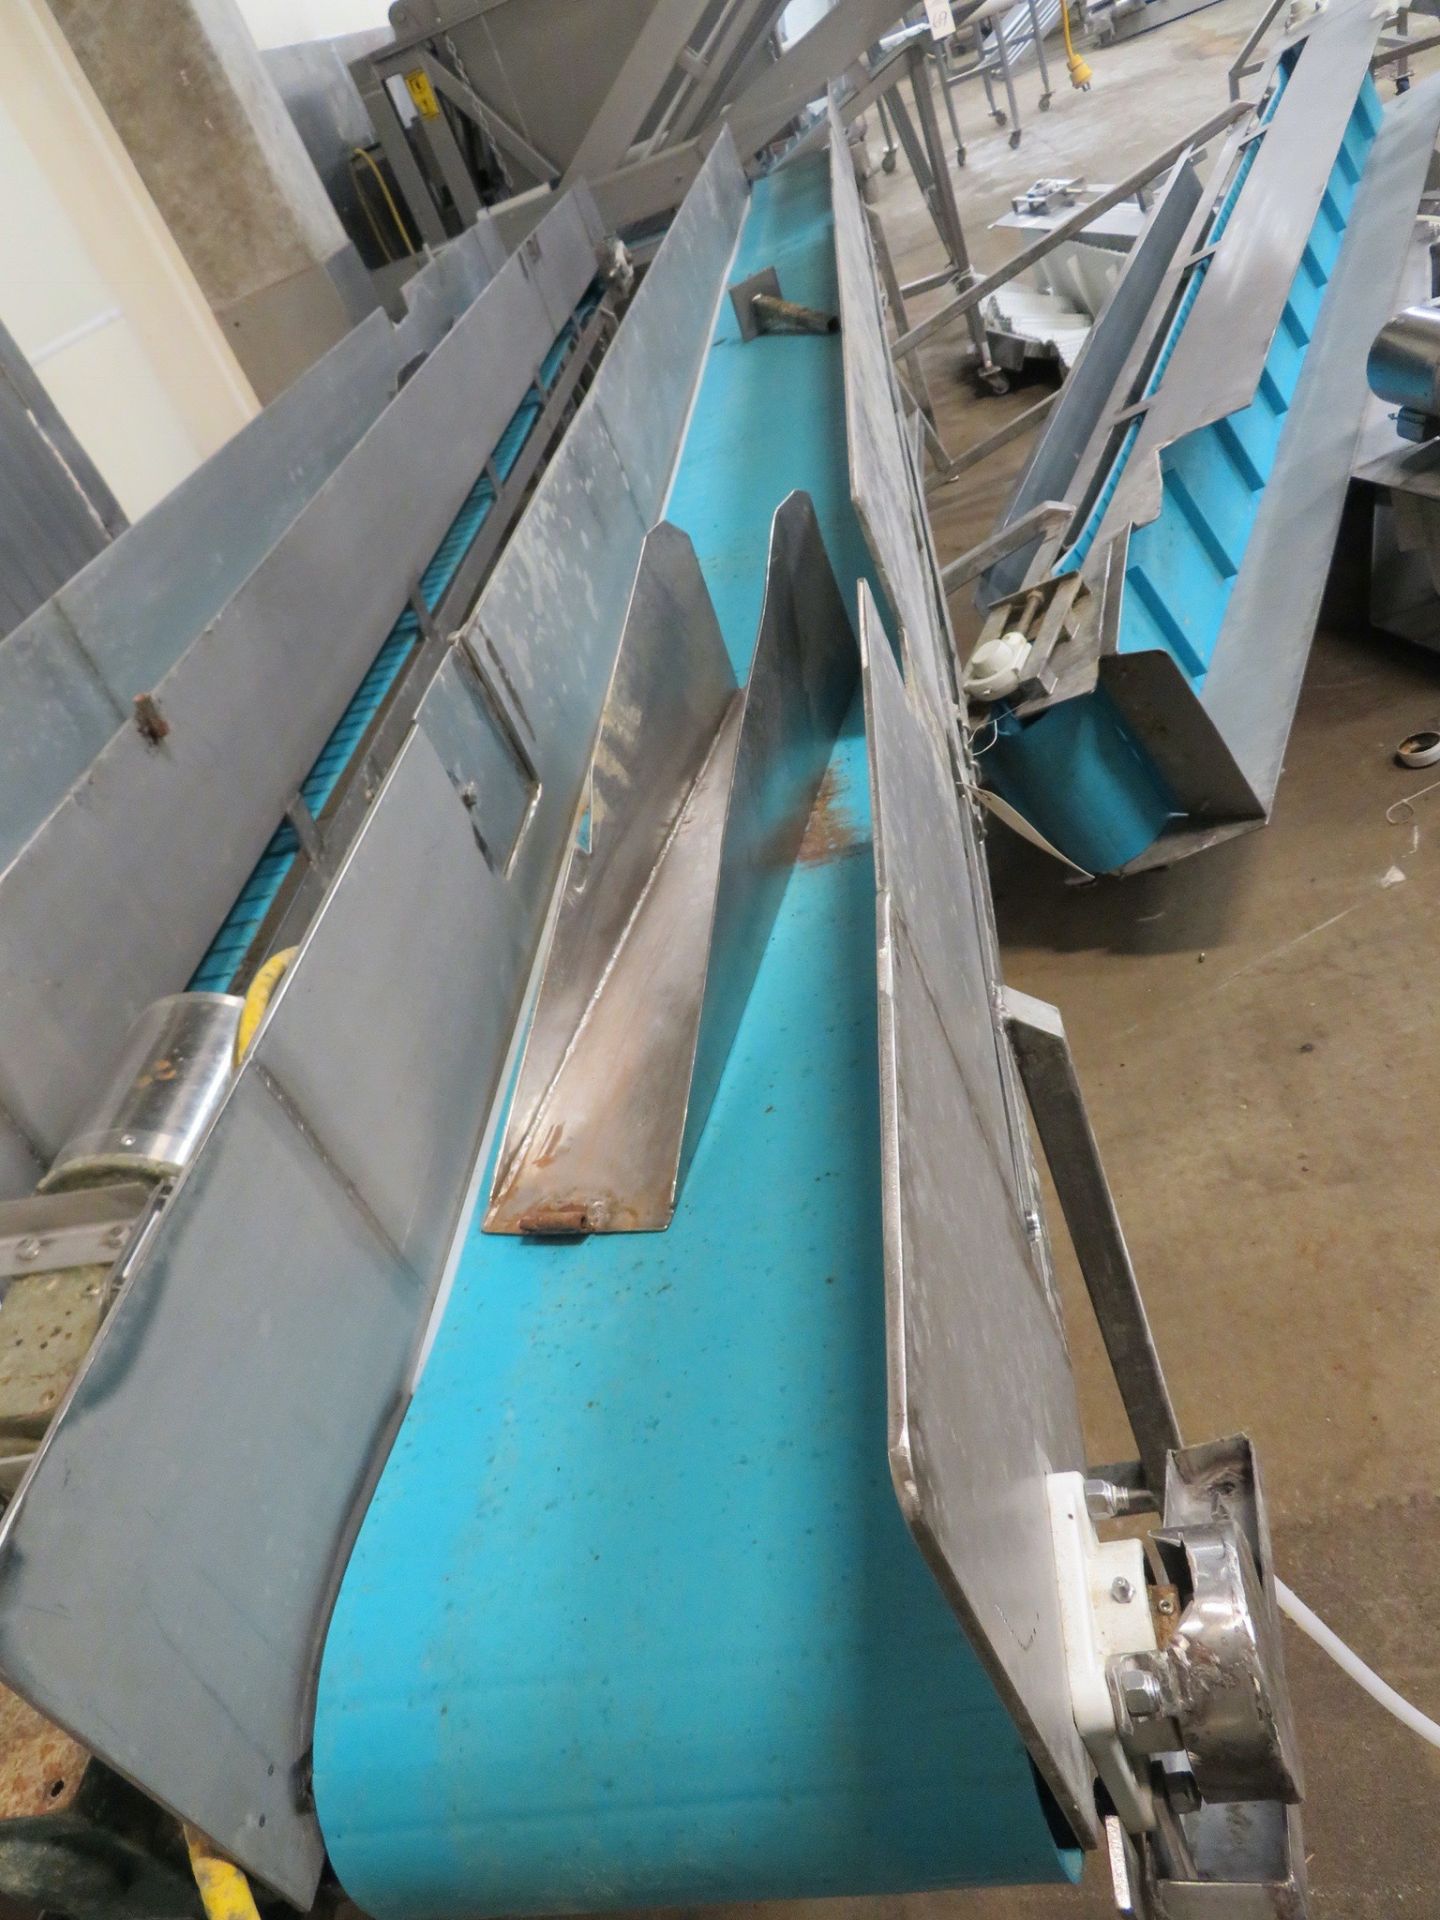 Stainless Steel Conveyor, 12"W x 16'L | Rigging Fee: $150